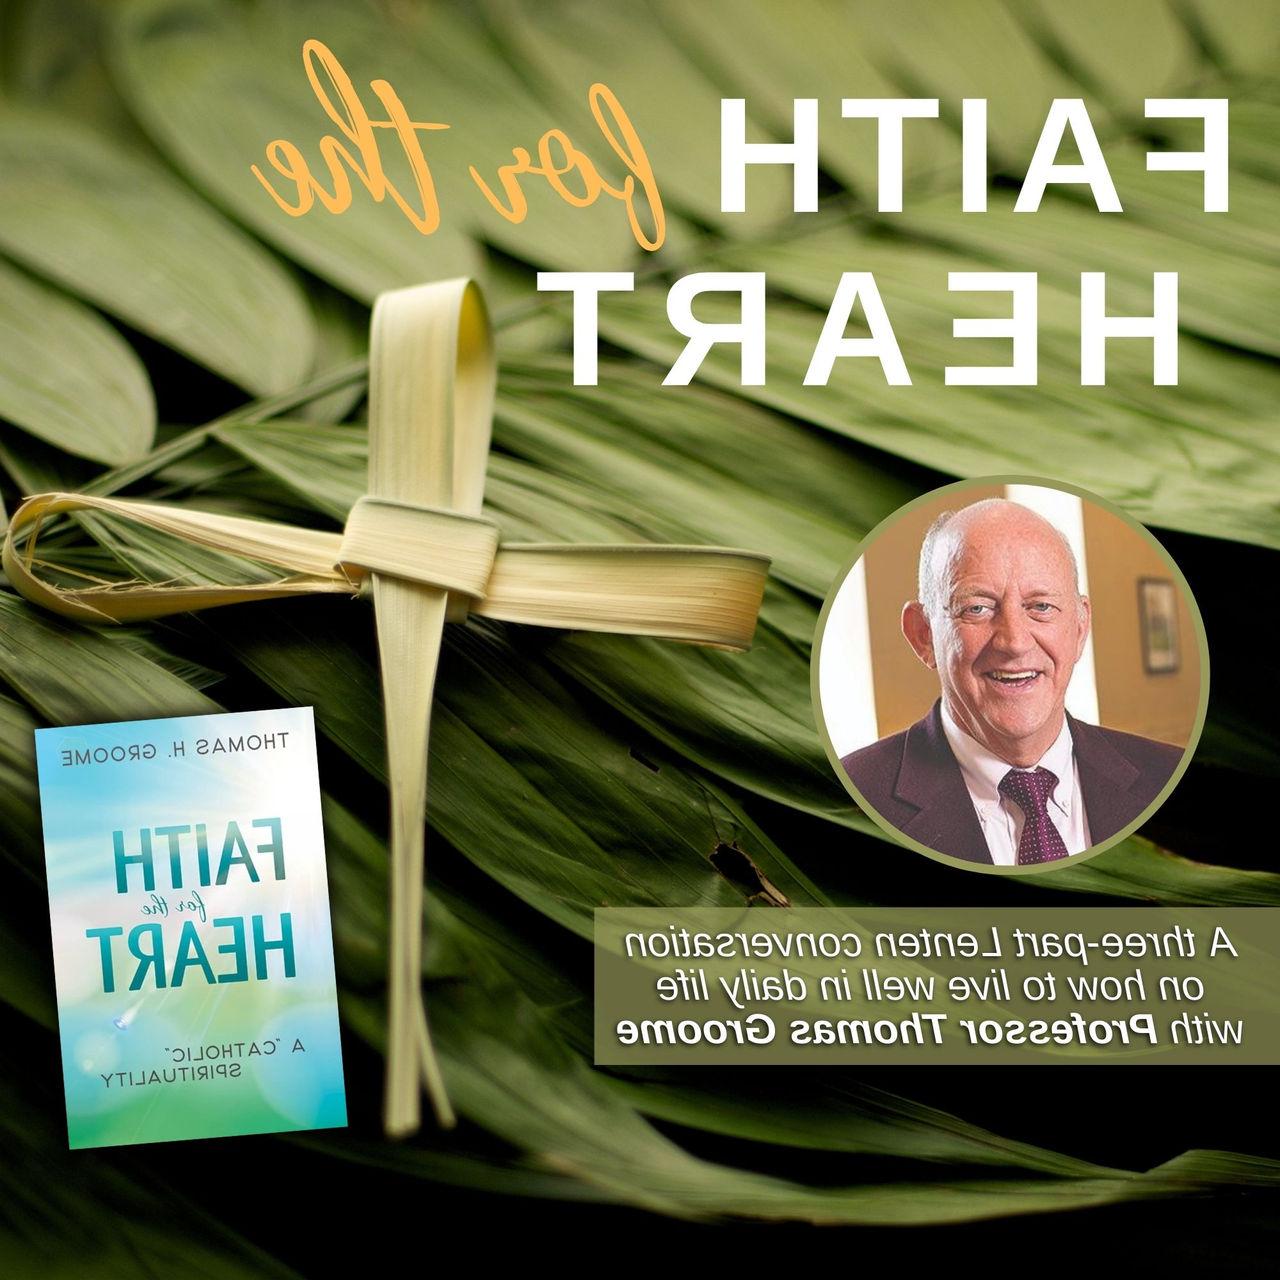 Faith for the Heart - Tom Groome event square - 2